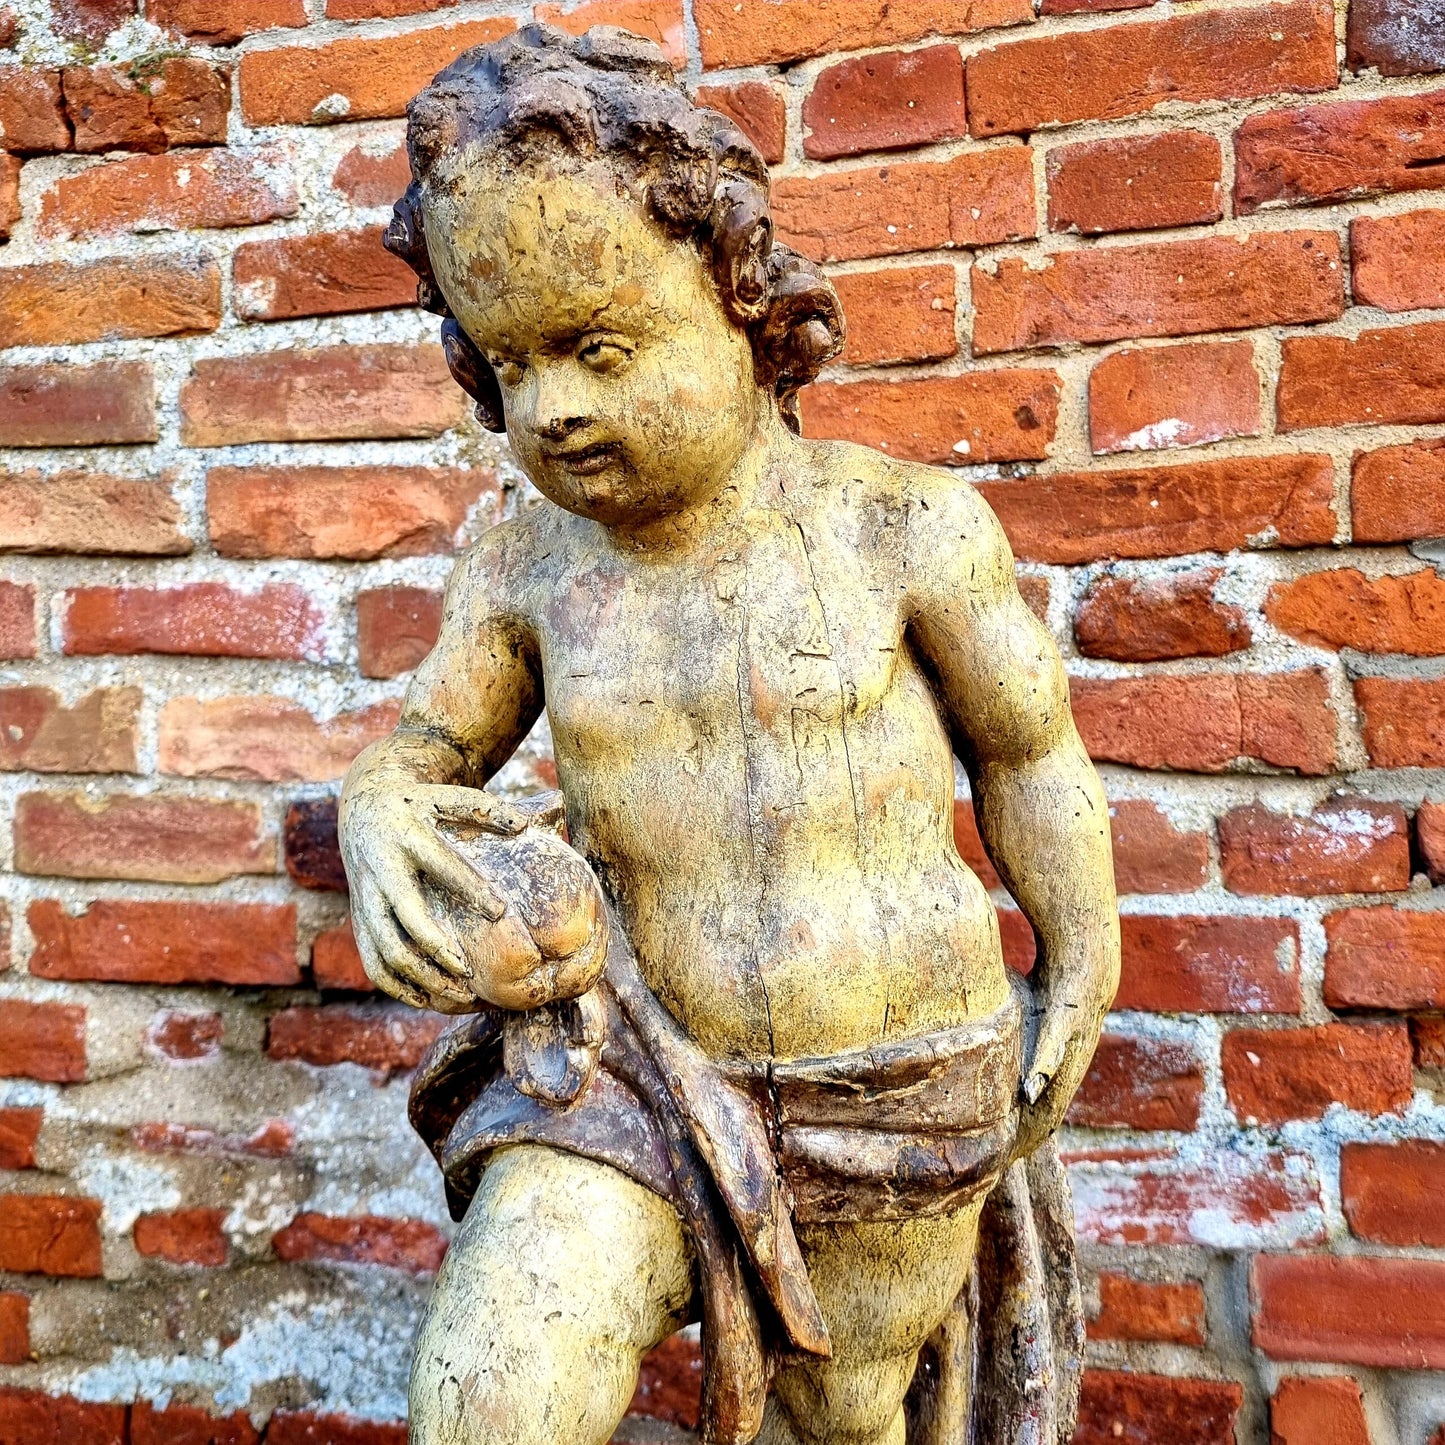 Early 17th Century Spanish Antique Carved Wooden Sculpture of a Cherub Attributed to Juan Martinez Montanes (1568-1649)